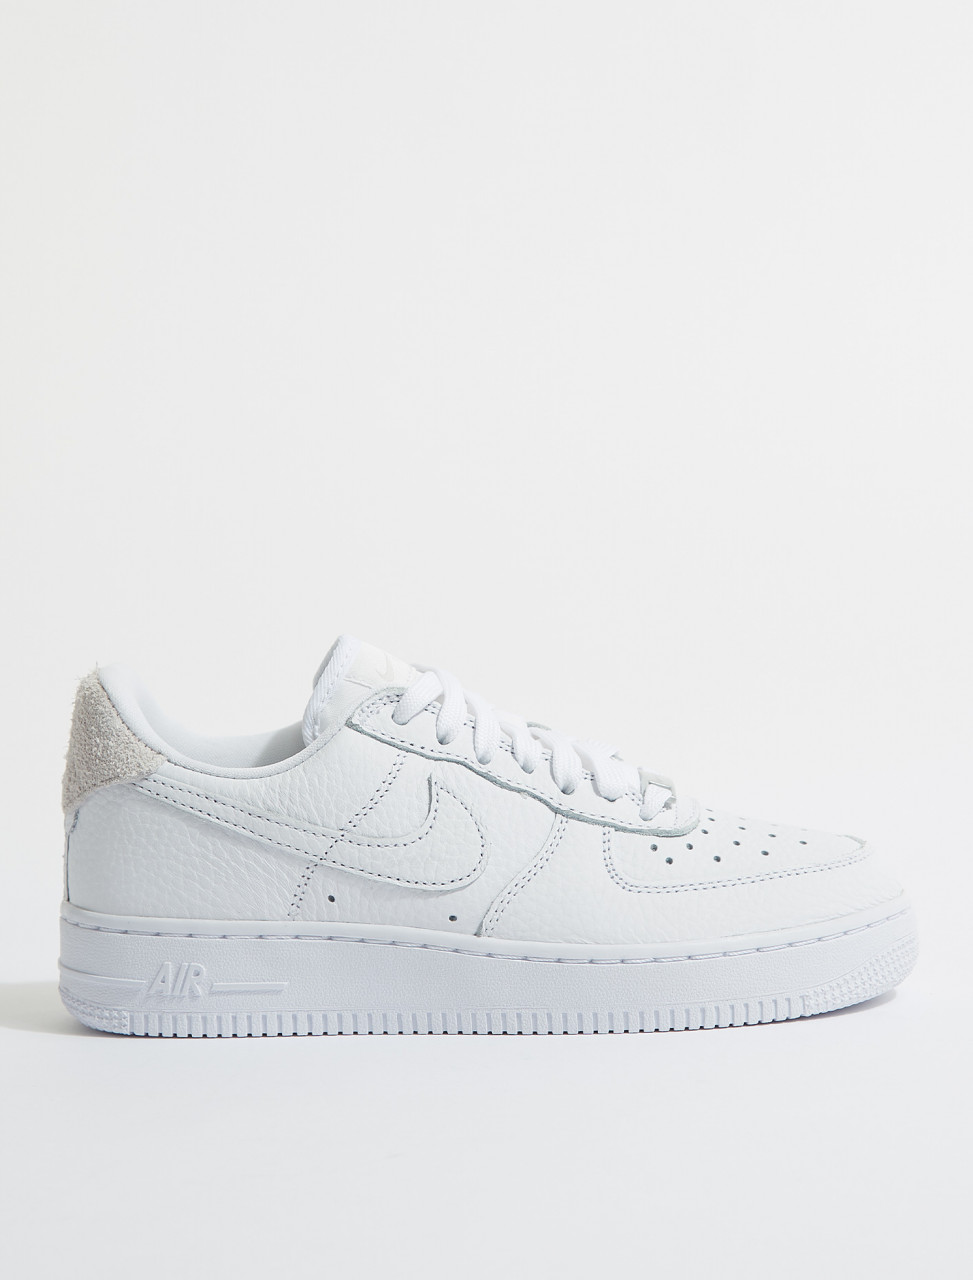 Nike Air Force 1 '07 Craft in White 